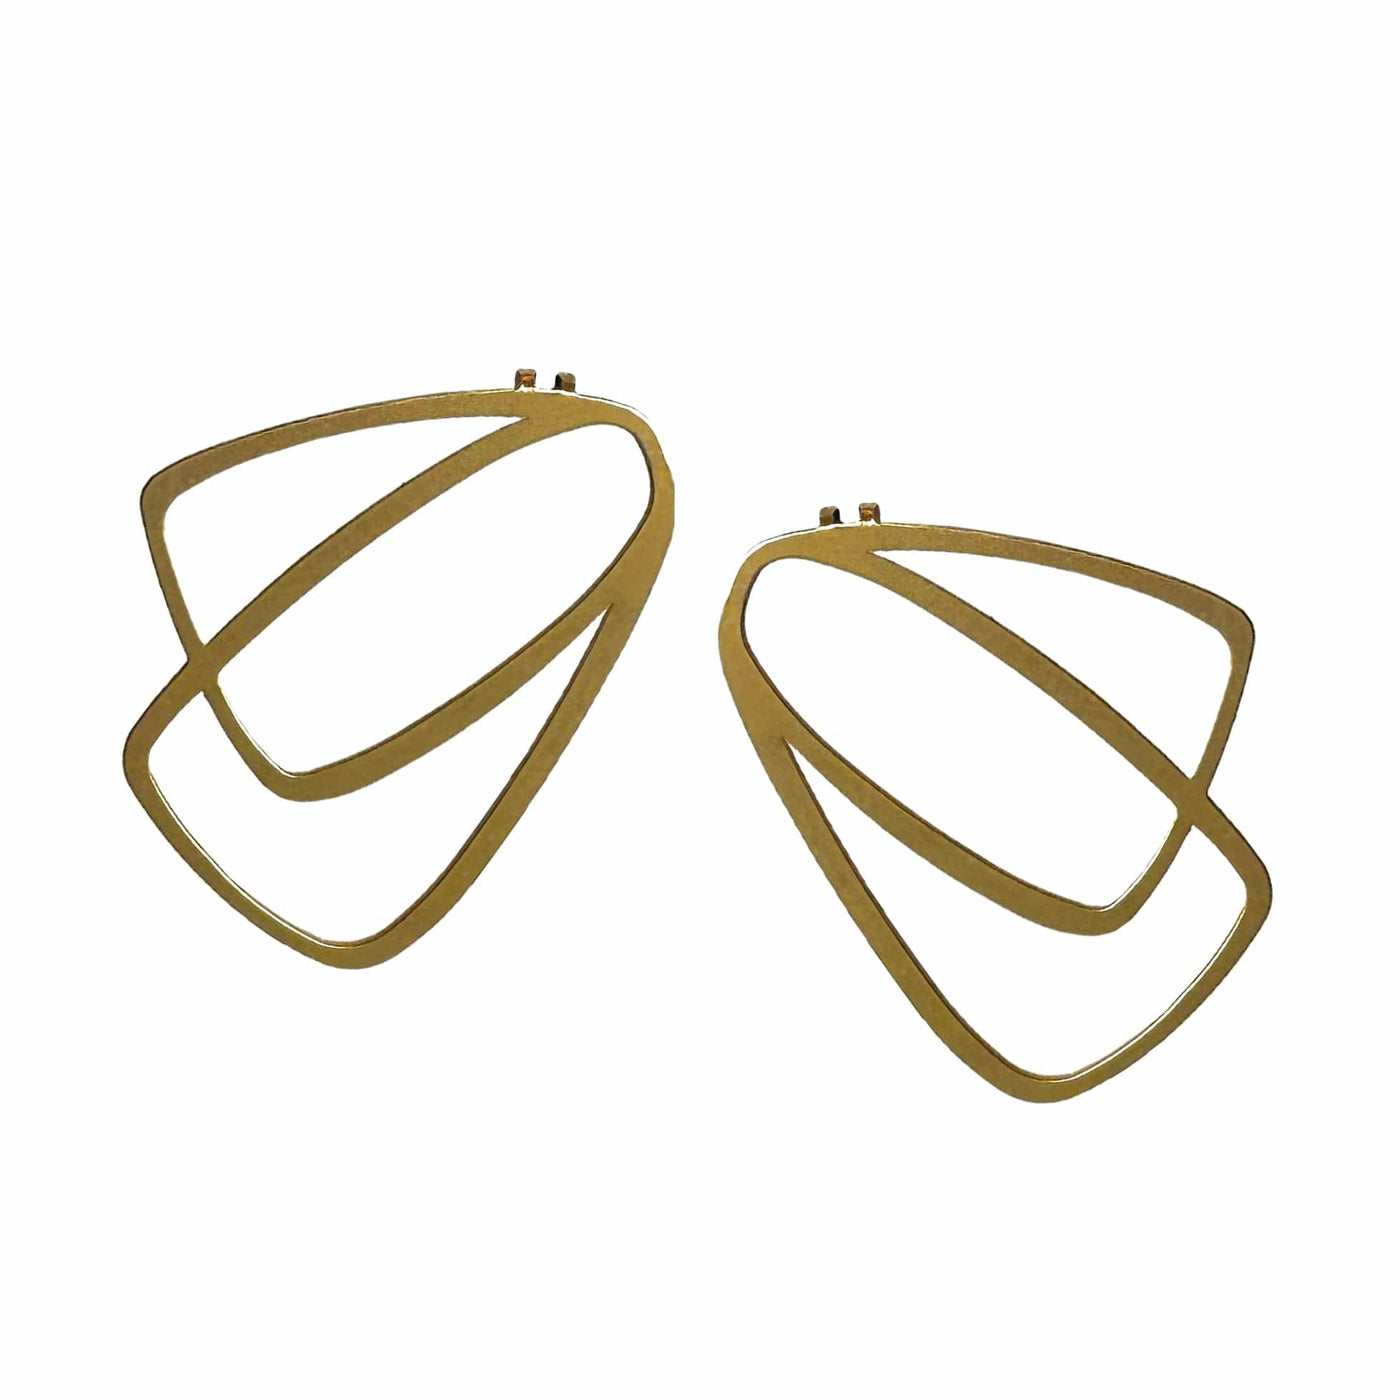 X2 Medium Outline Earrings - Additional 2nd Layer - inSync design